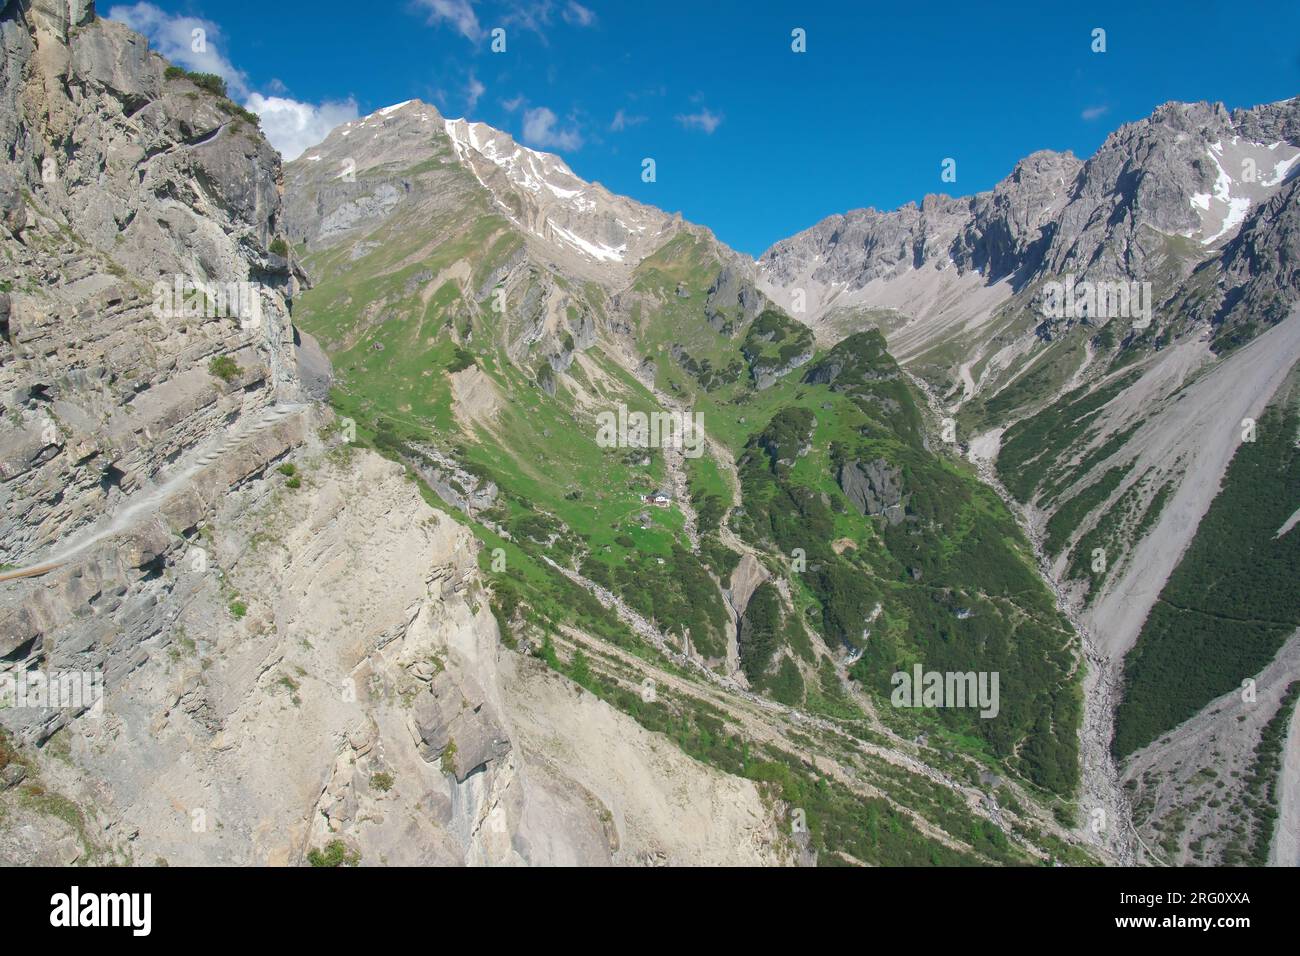 'Drischlsteig' (Drischl mountain-path, on the left) leads from Hoch-Imst Alpjoch to Muttekopfhuette (centre of the image, small) at the bottom of Mutt Stock Photo